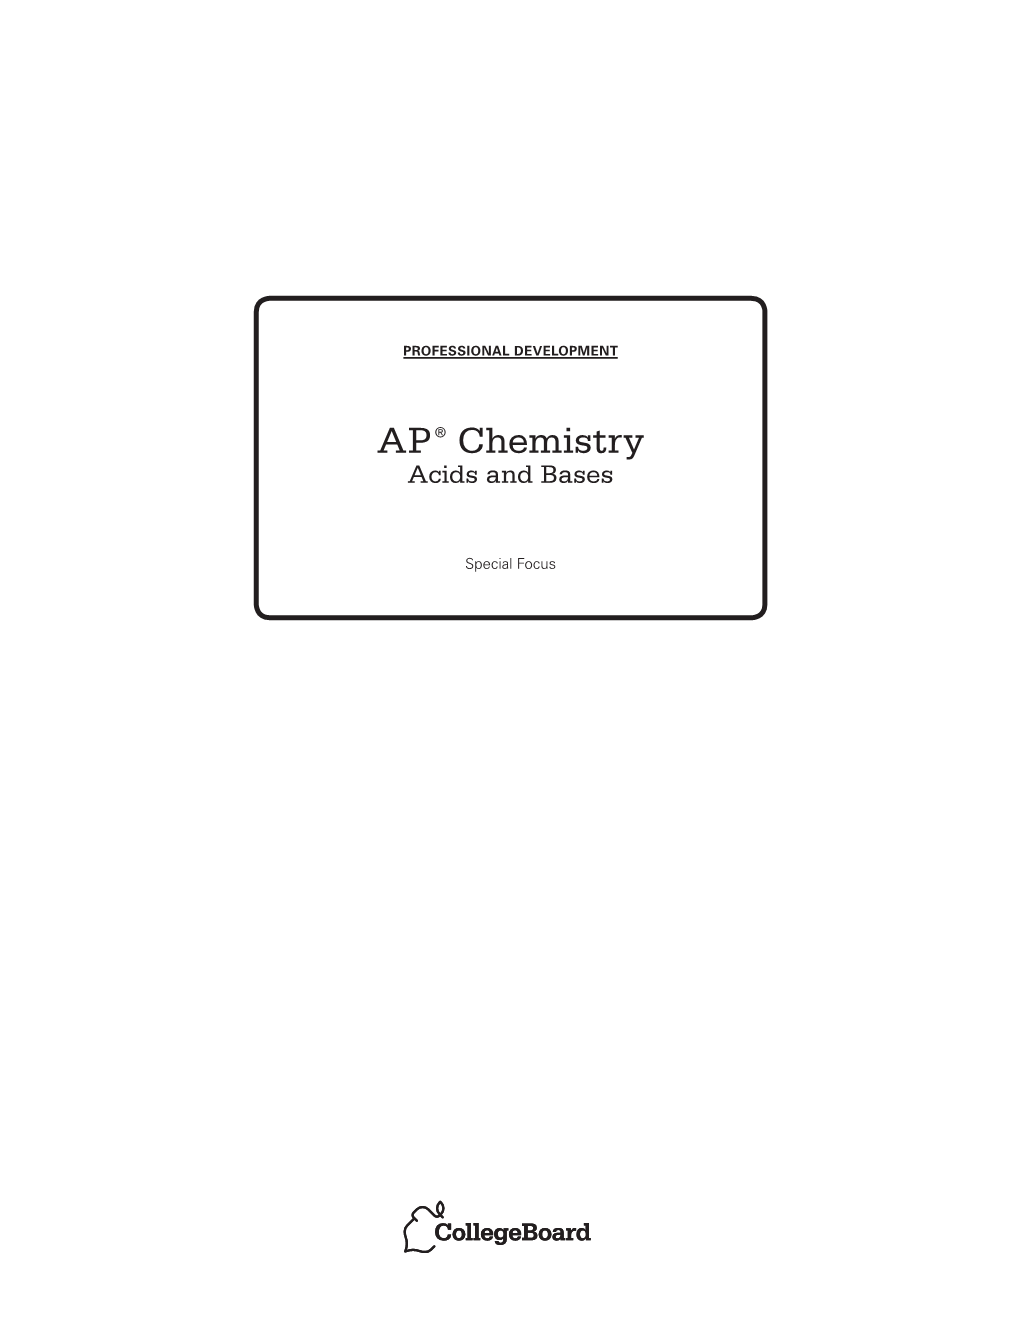 AP® Chemistry Acids and Bases